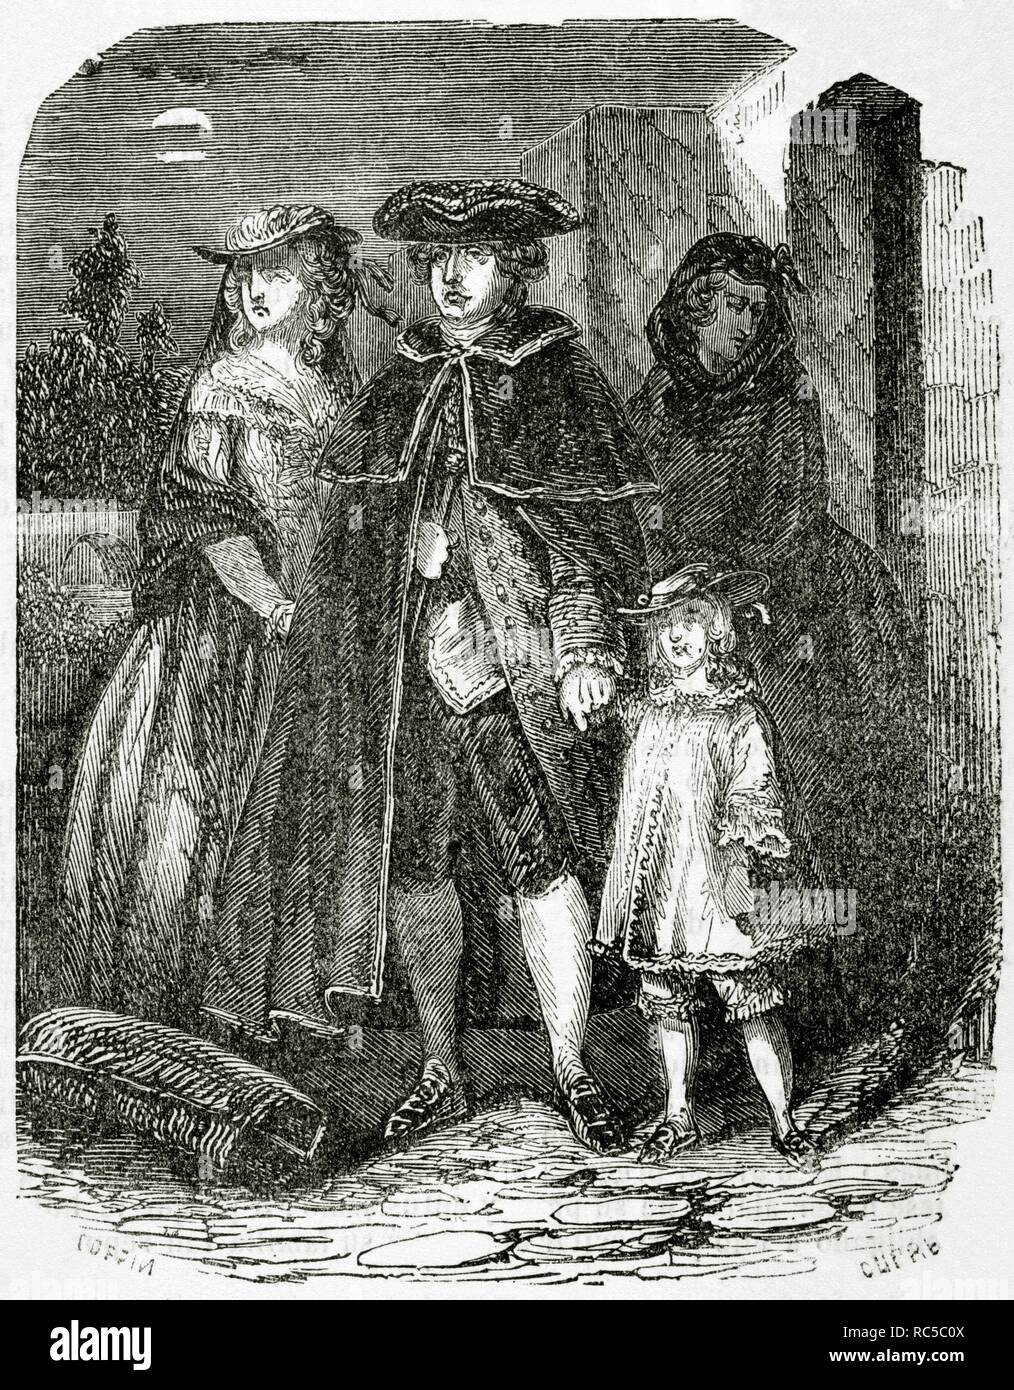 French Revolution (1789-1799). Escape of Louis XVI (1754-1793) and his family, 1791. Engraving by Dupre. Universal Library. Popular editions, 1851. Stock Photo